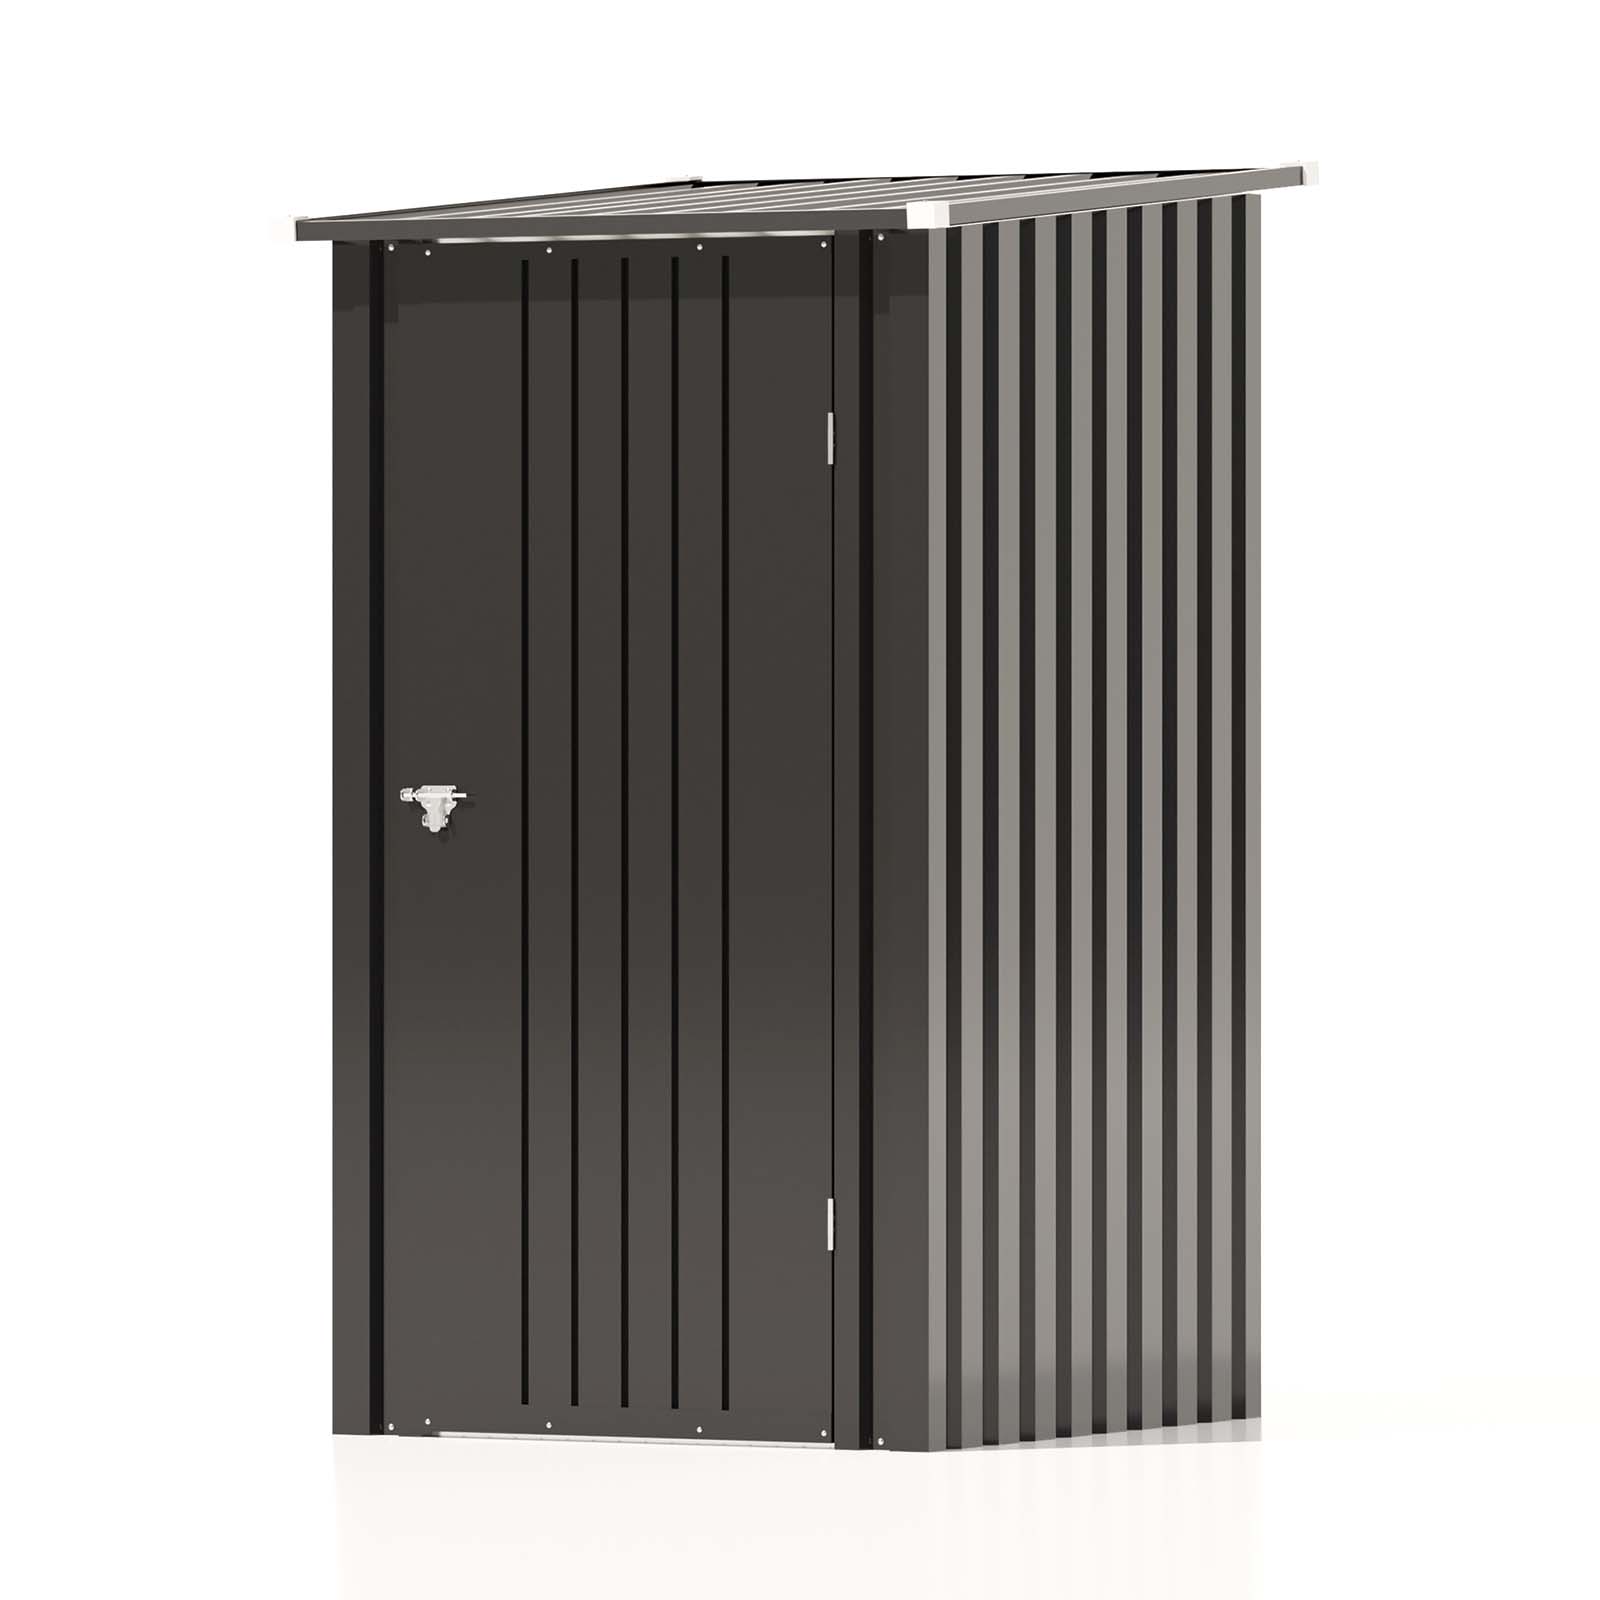 Patiowell 3x3 Metal Shed-Ink Black